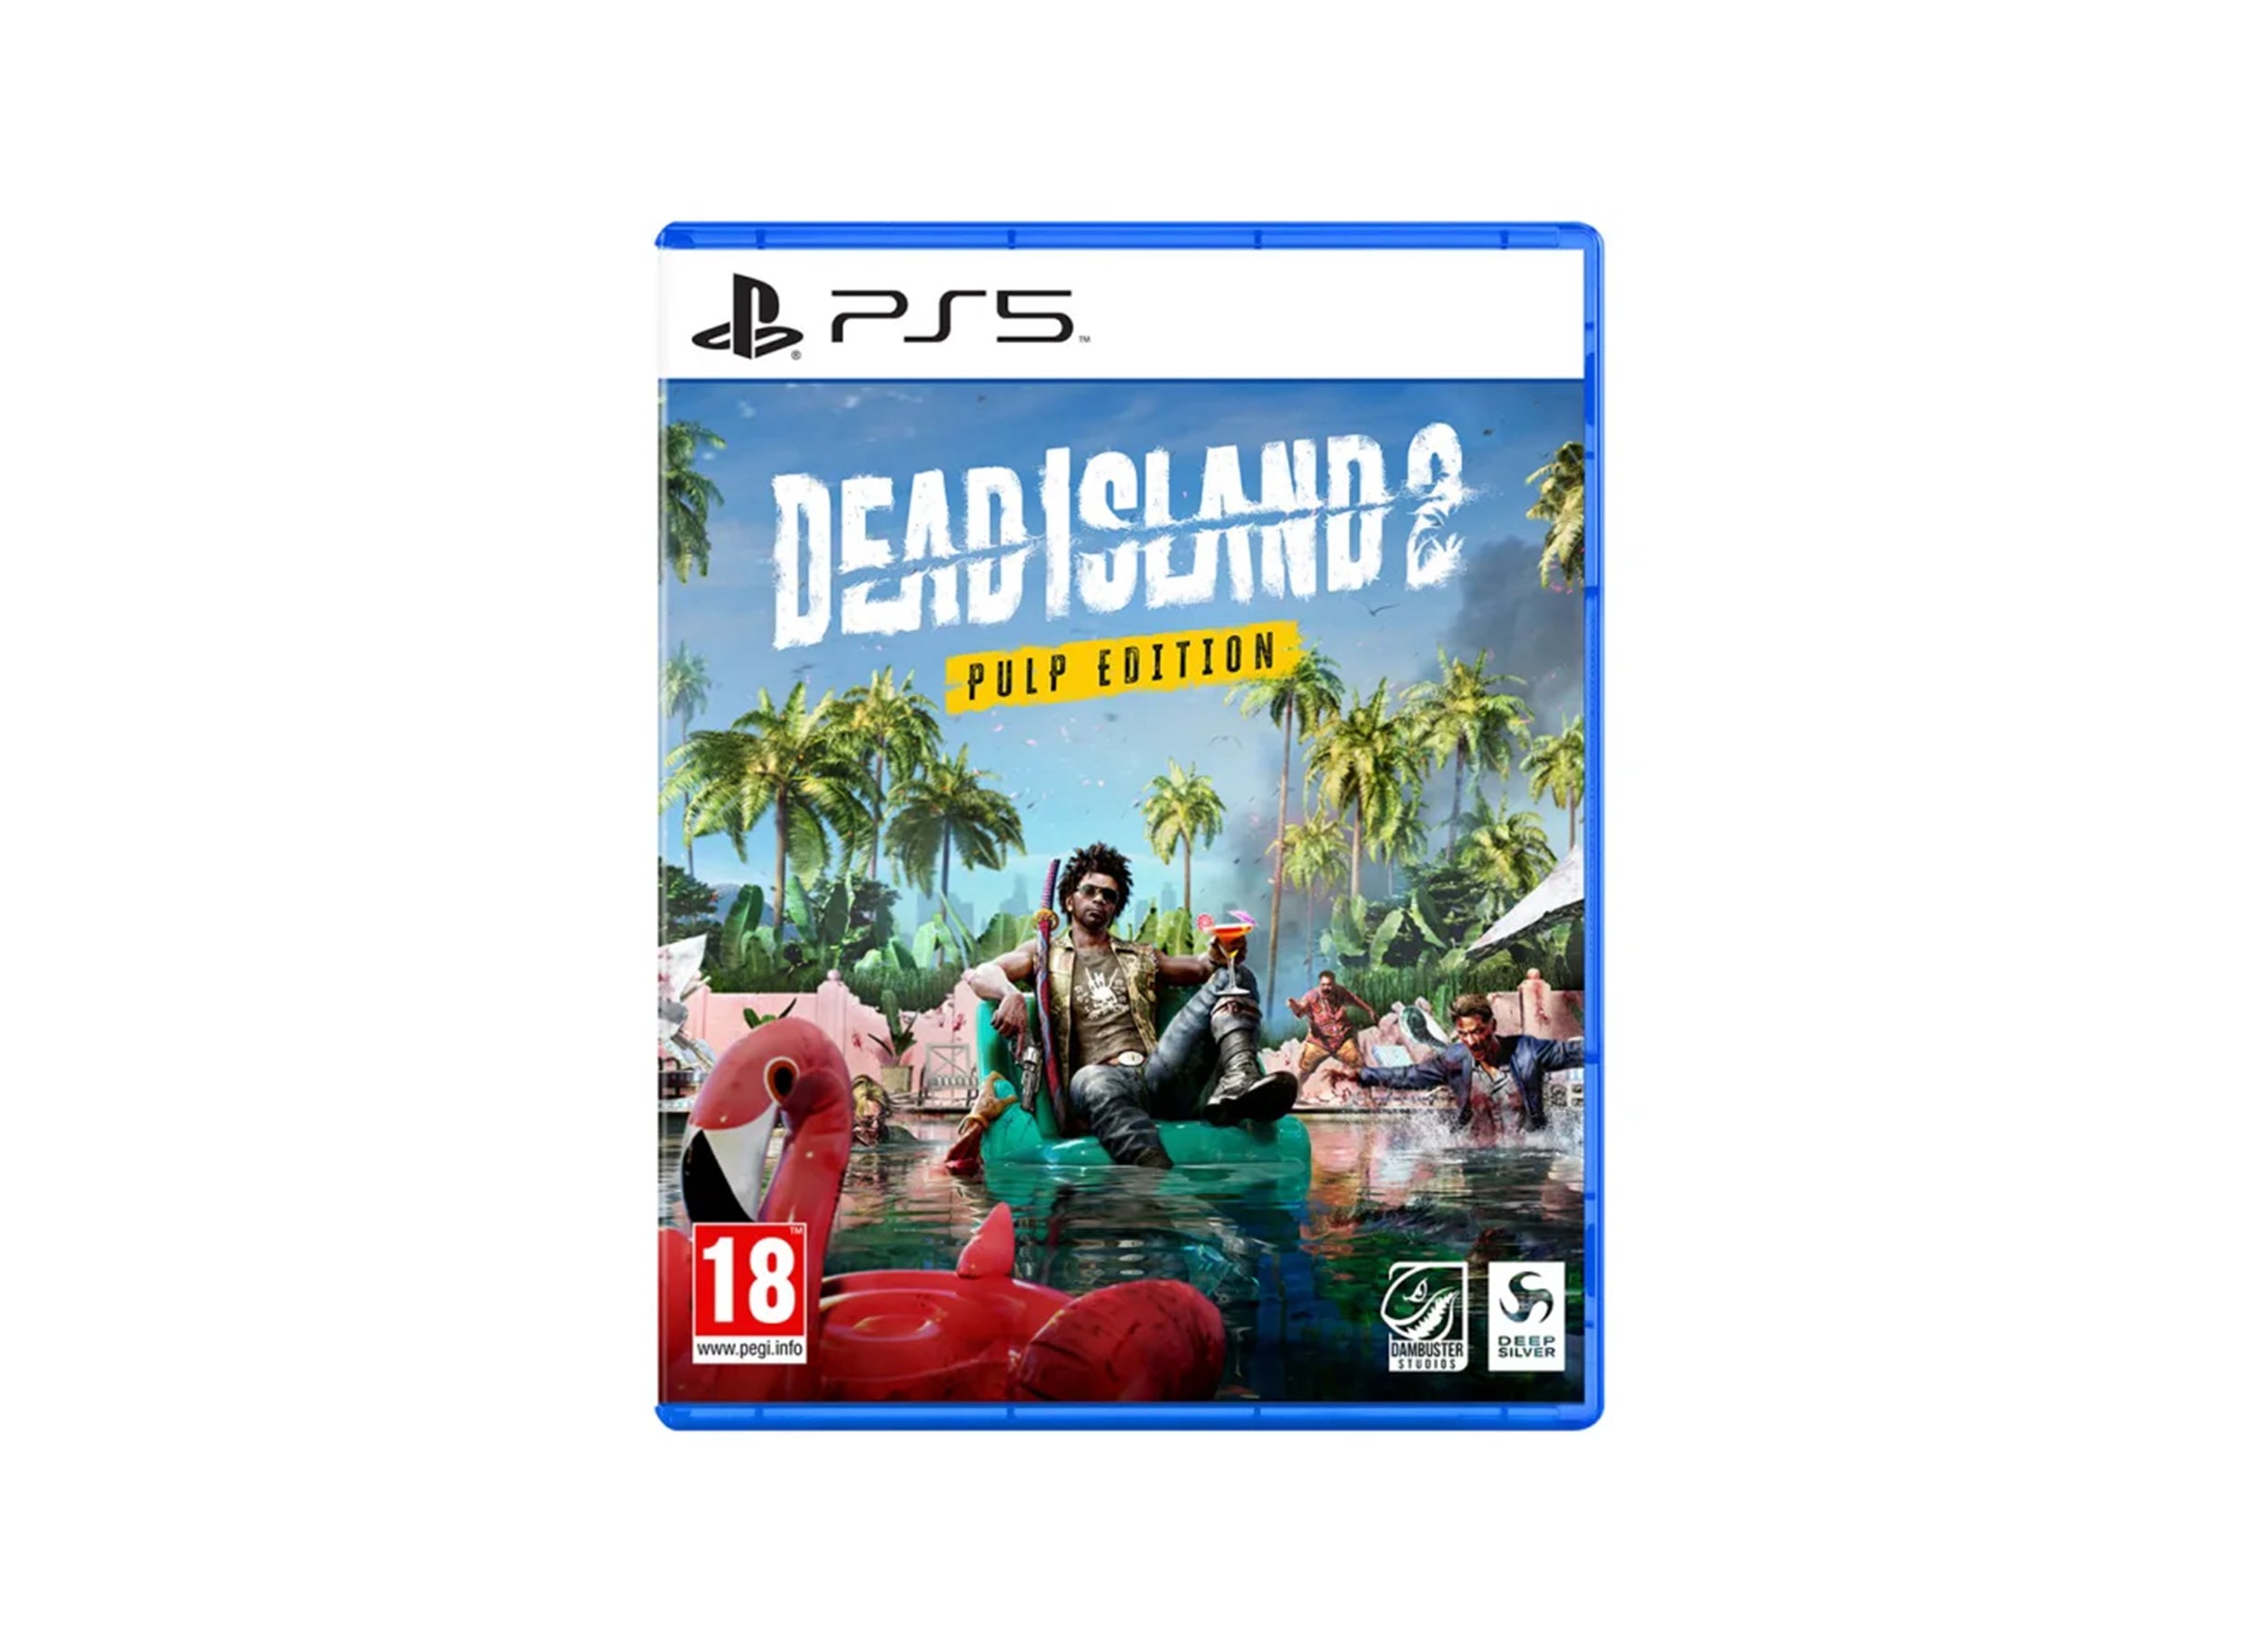 Dead Island 2 release date moved forward: Best pre-order deals on PS5 and  more | The Independent